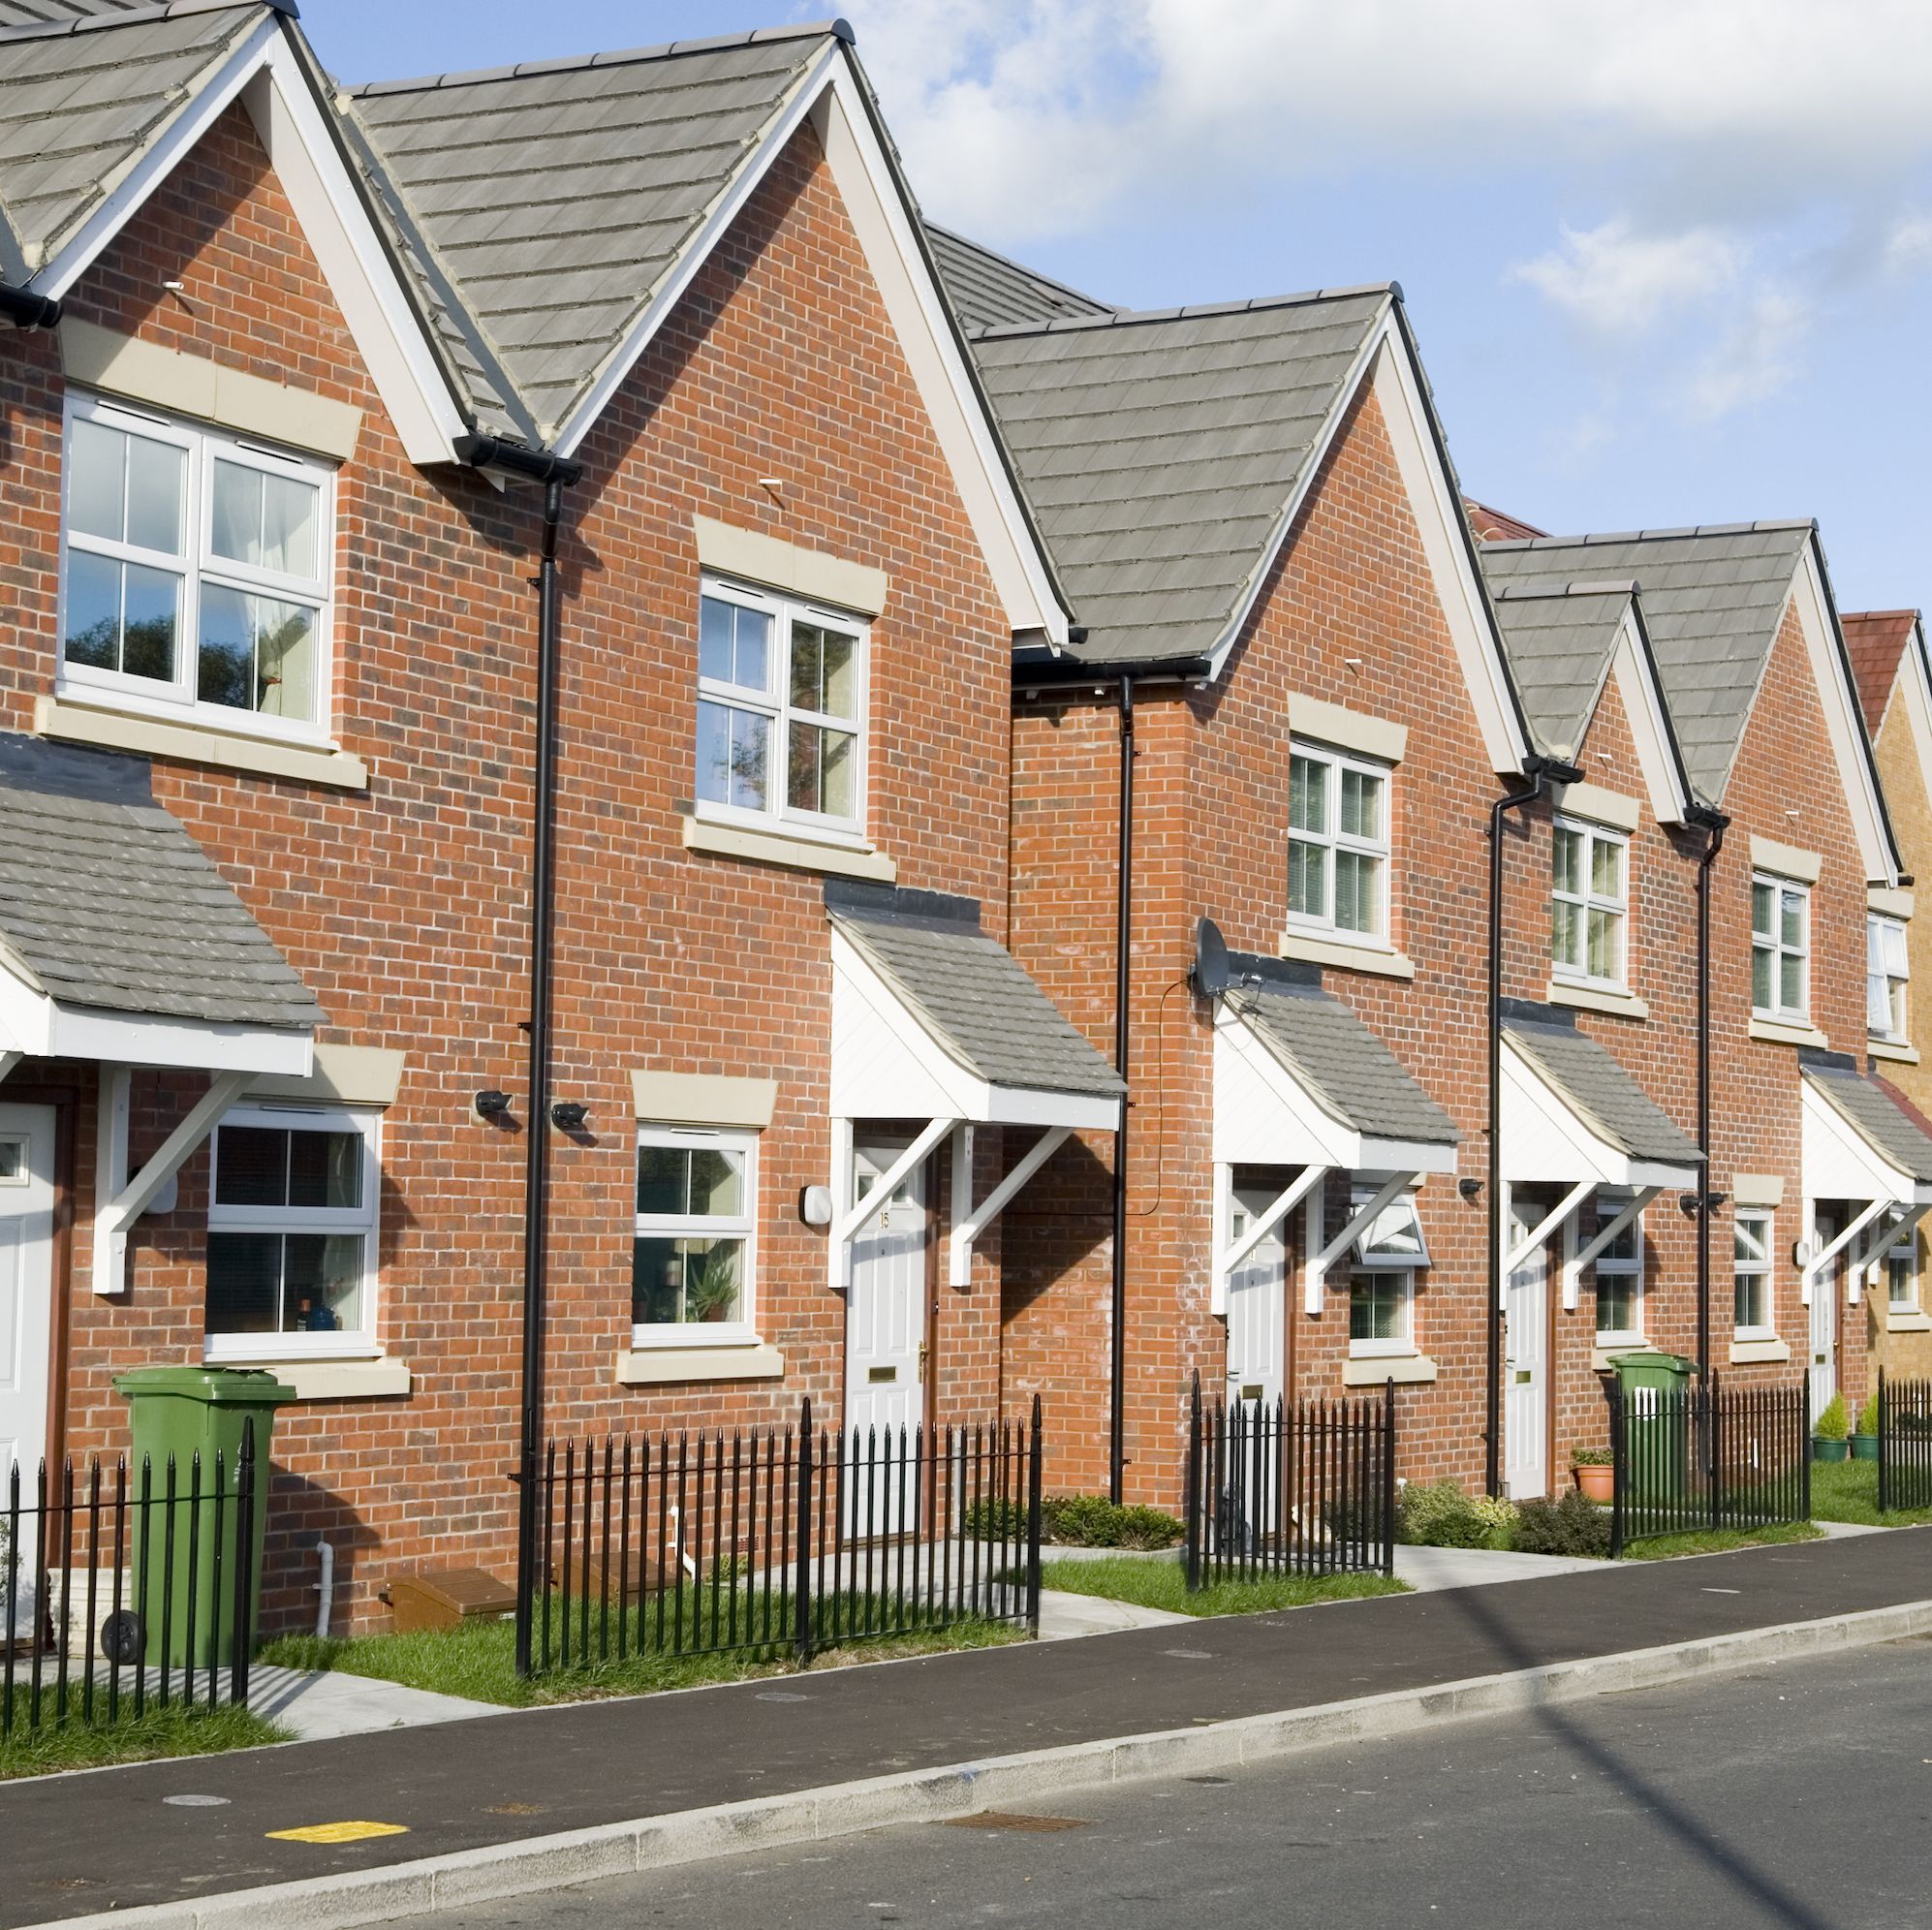 10 cheapest places in the uk to buy a new build